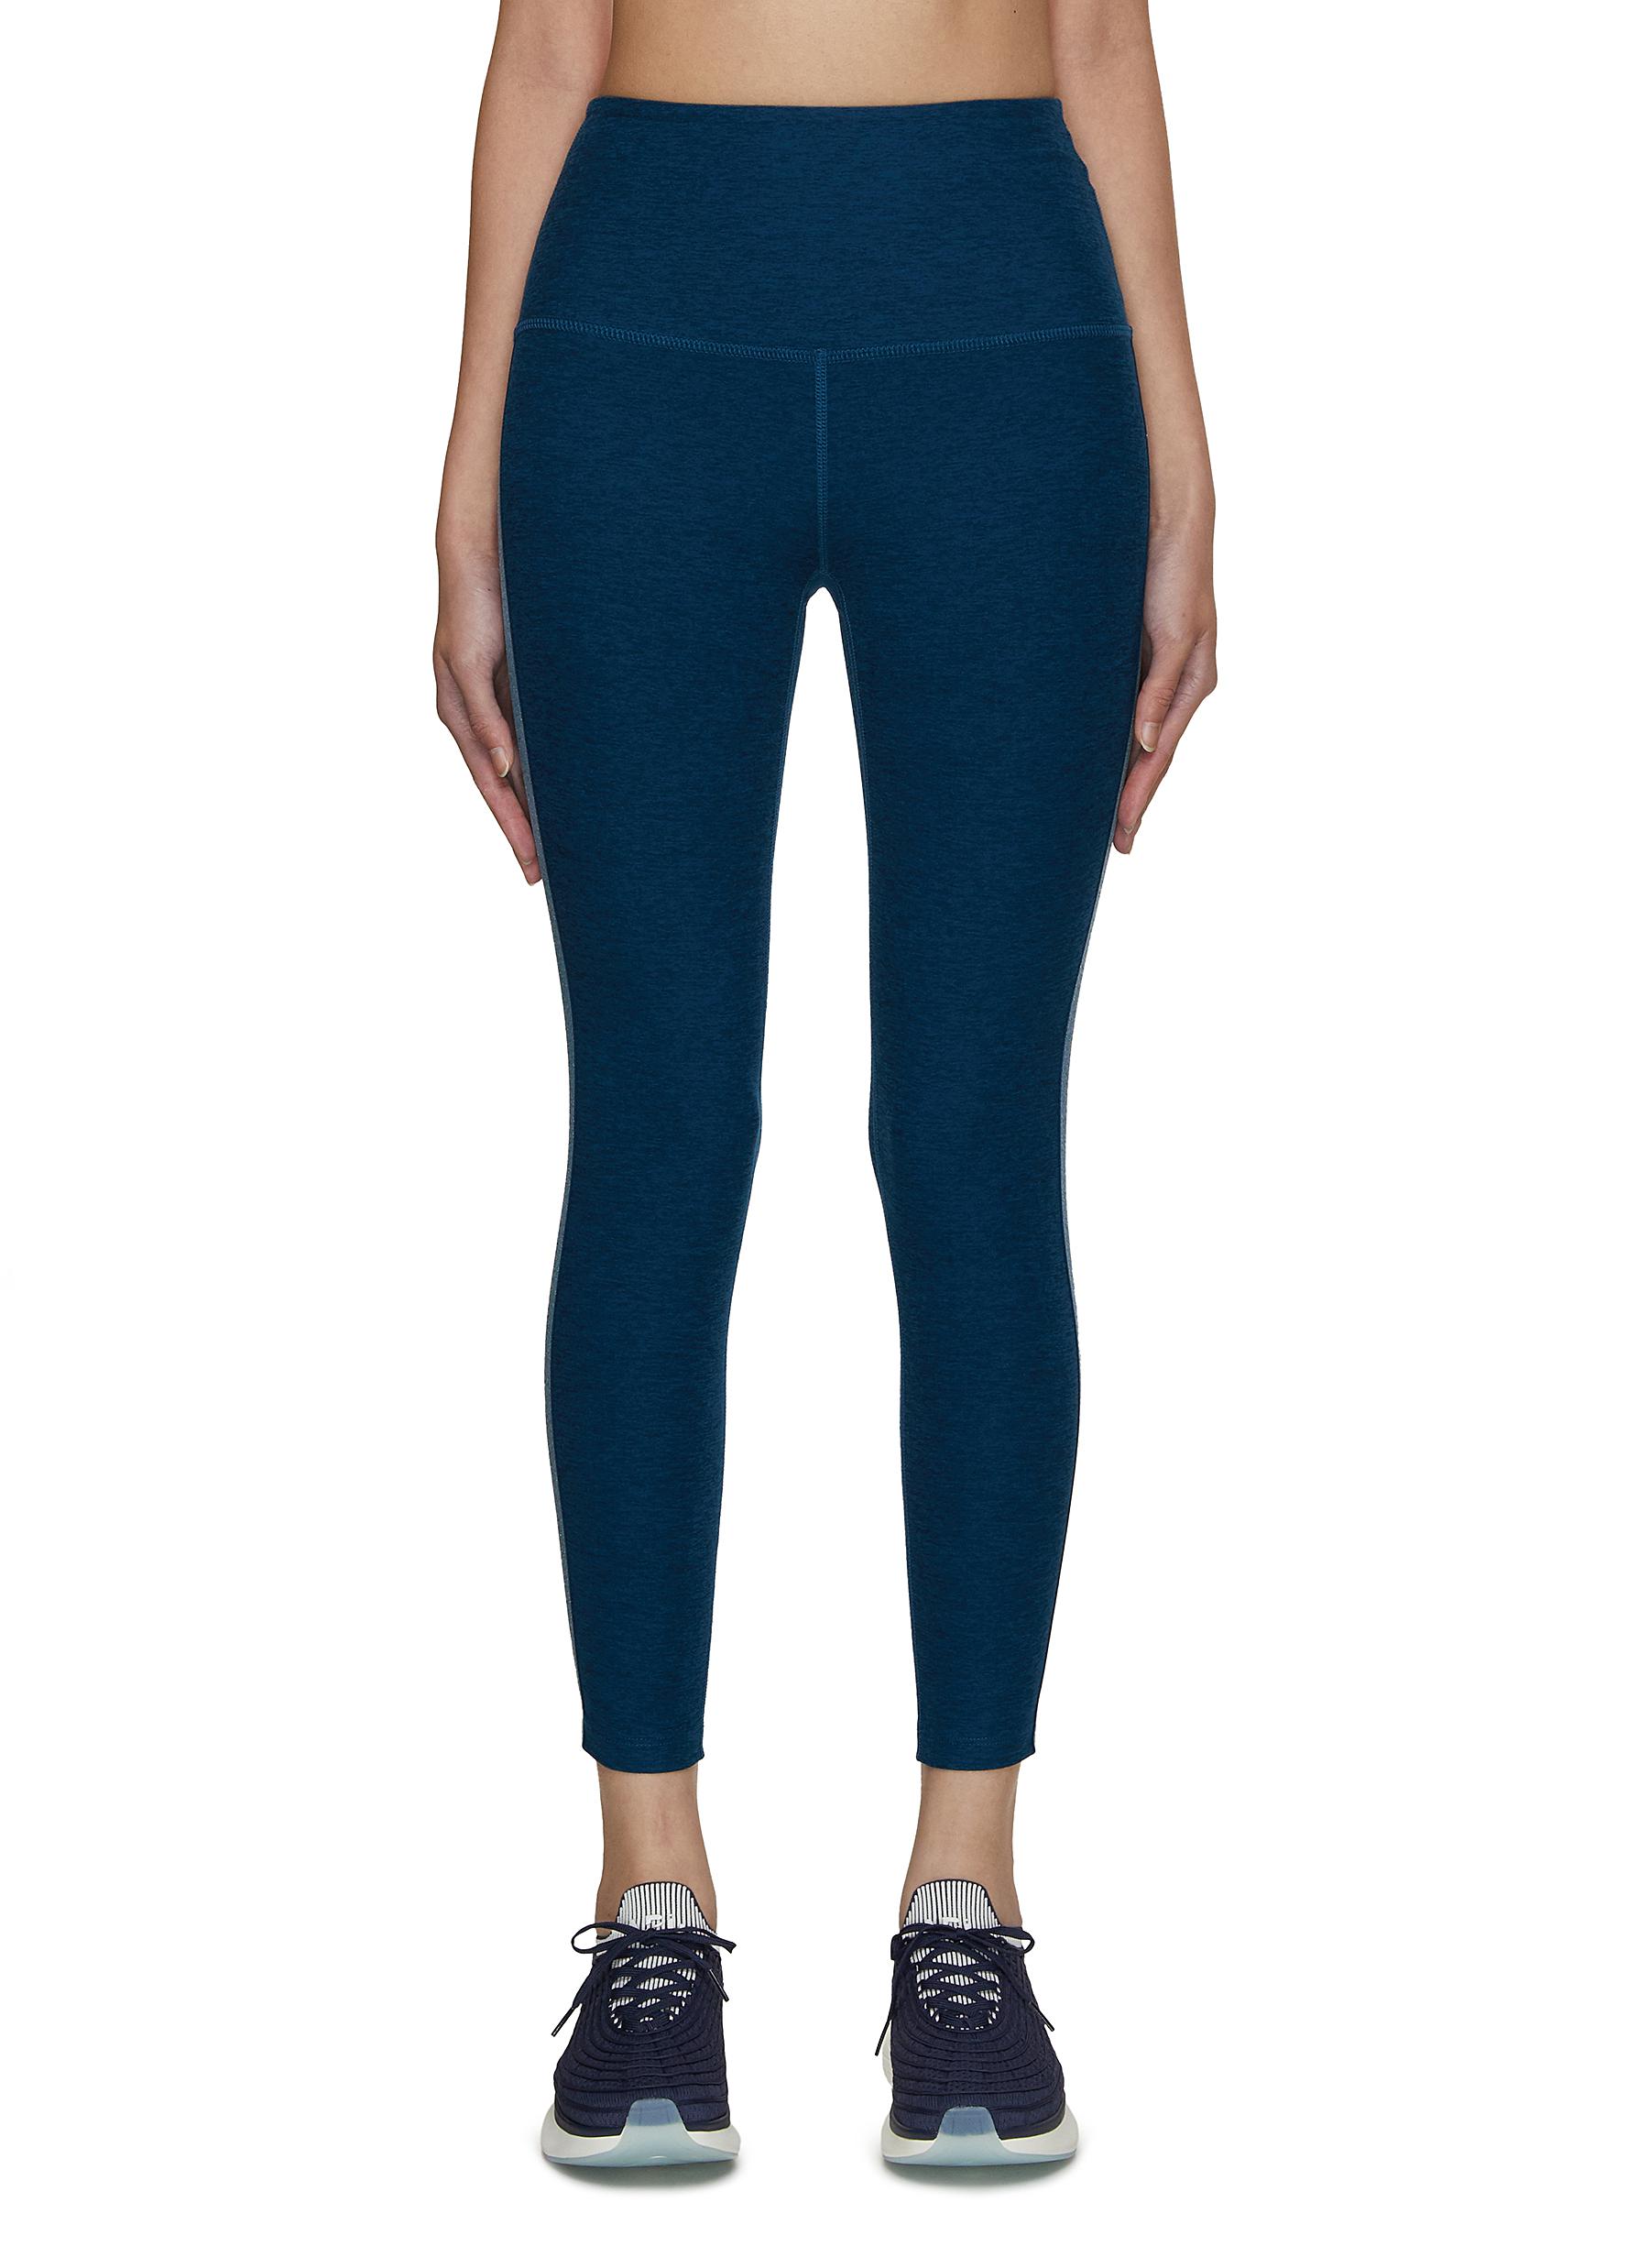 Beyond Yoga Spacedye At Your Leisure High Waisted Midi Legging in Truffle  Heather | REVOLVE